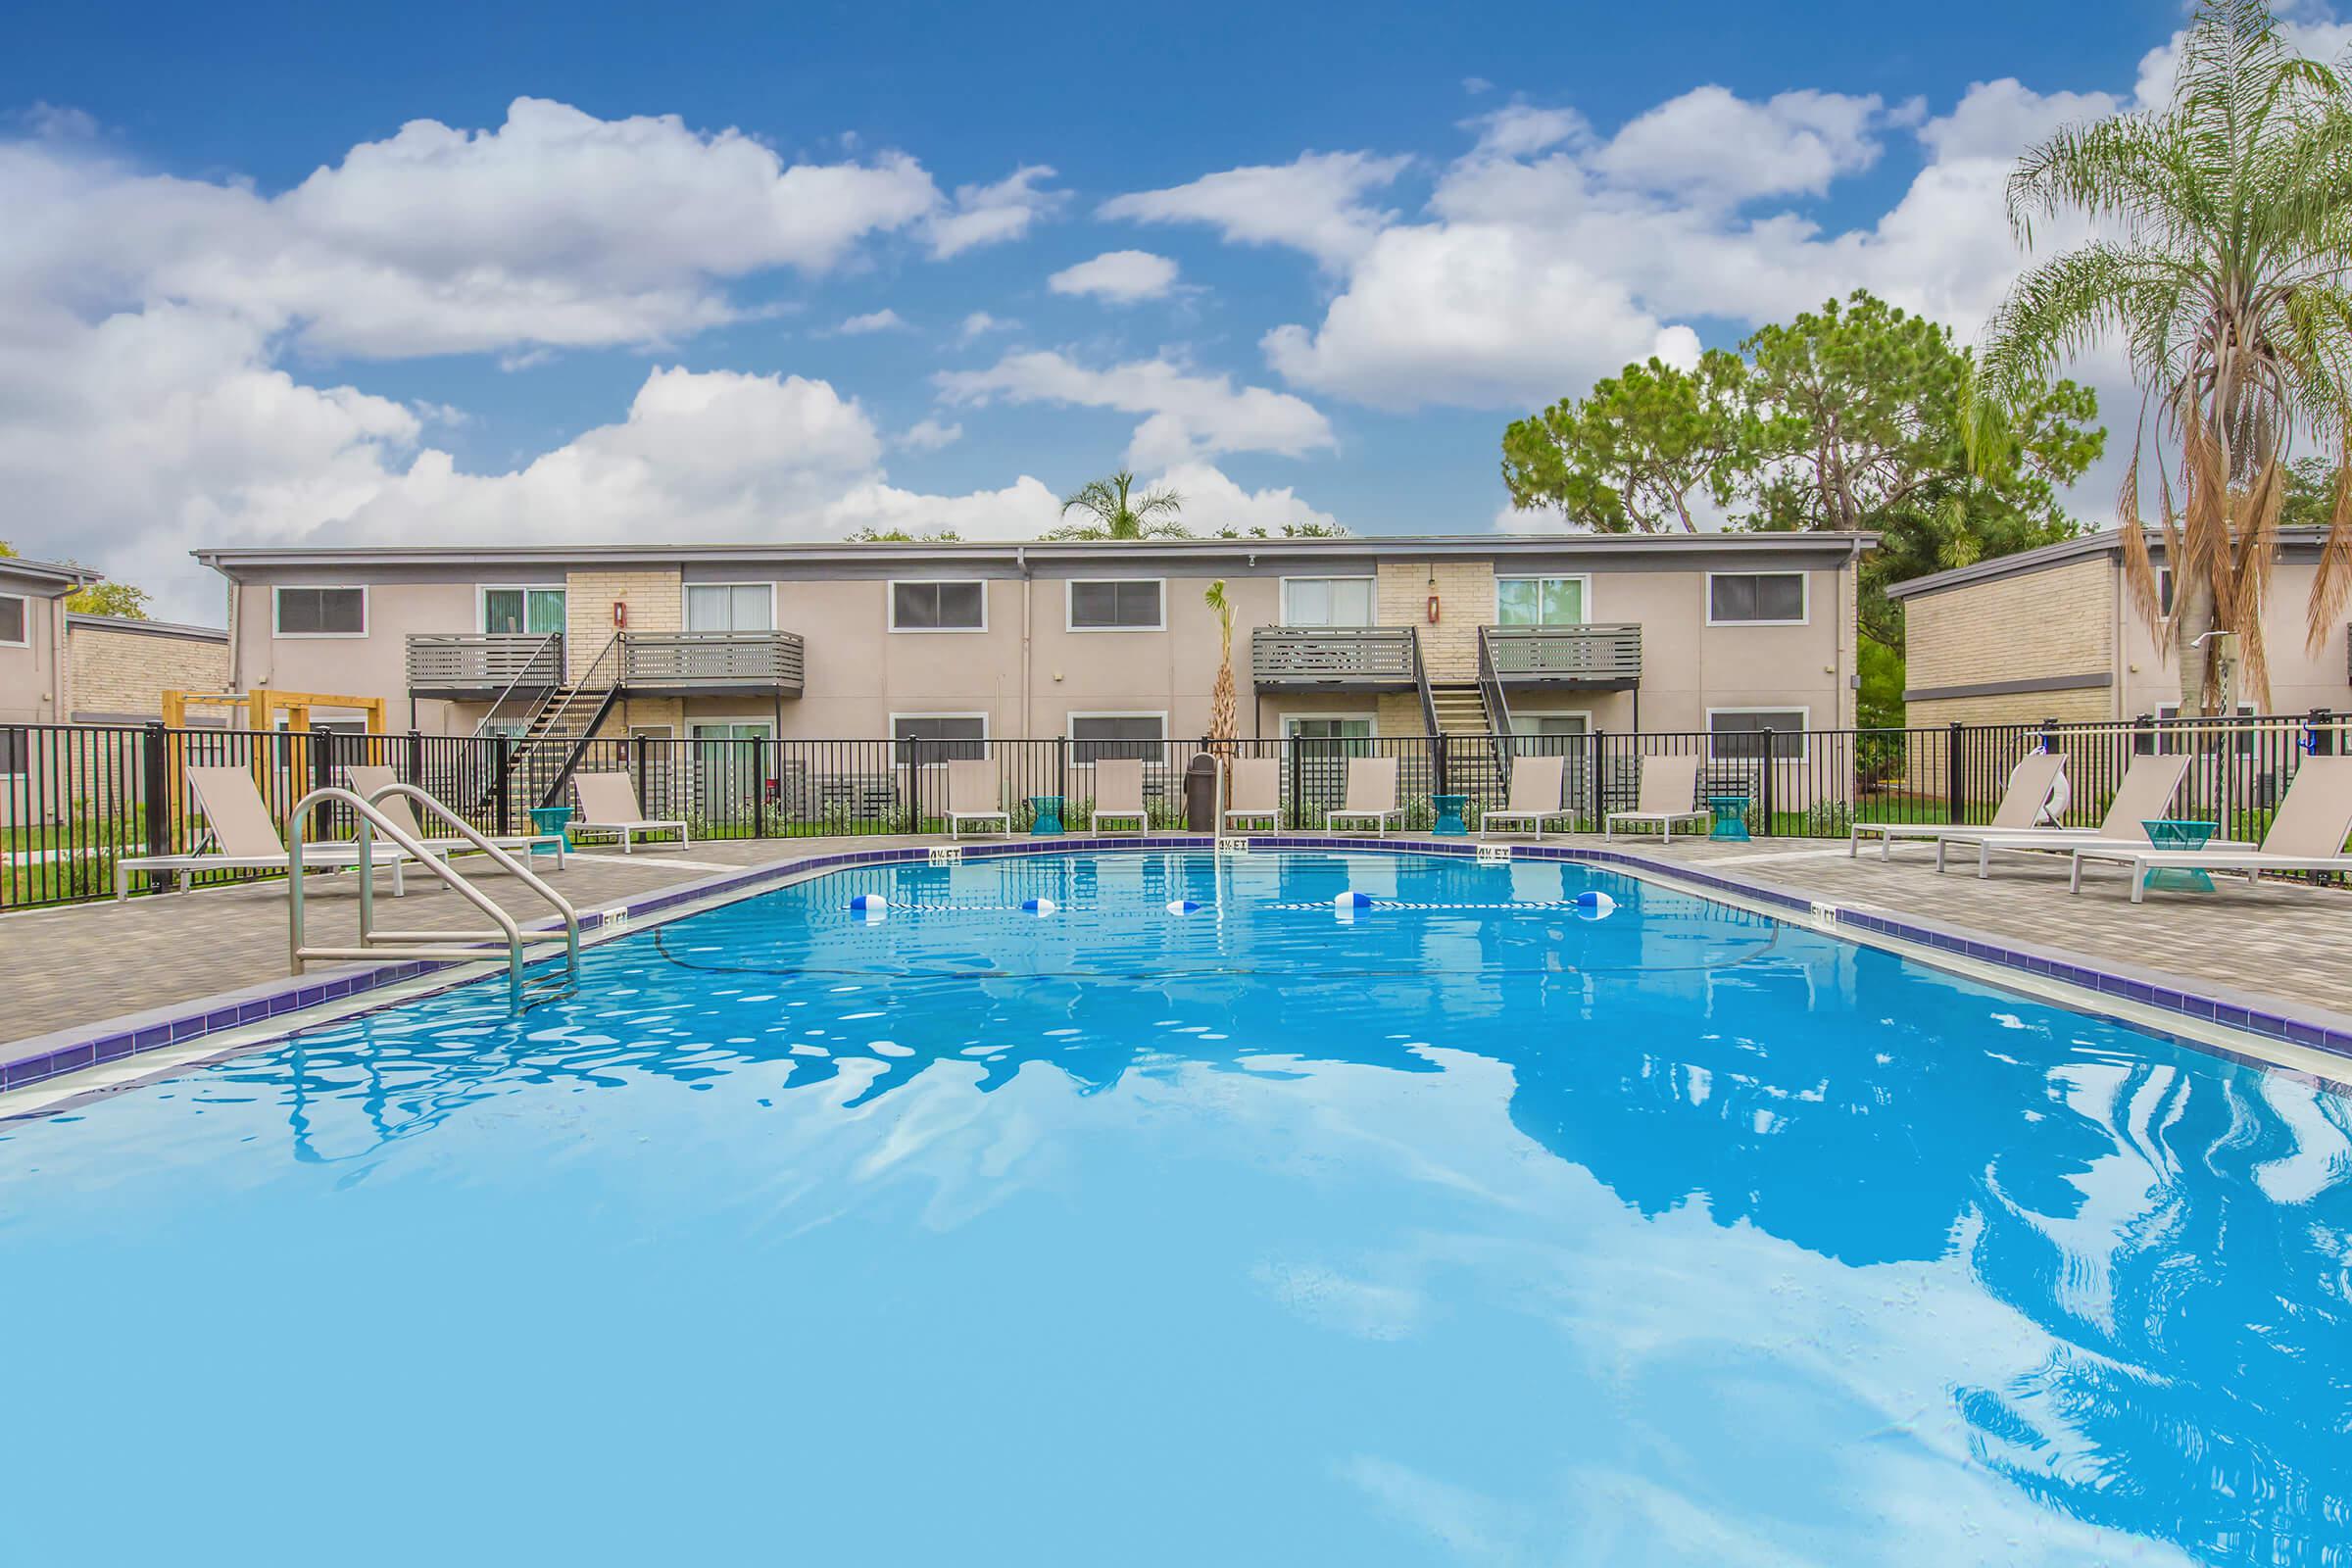 DIP YOUR TOES IN OUR SHIMMERING SWIMMING POOL AT  THE CROSSINGS AT 66TH APARTMENTS